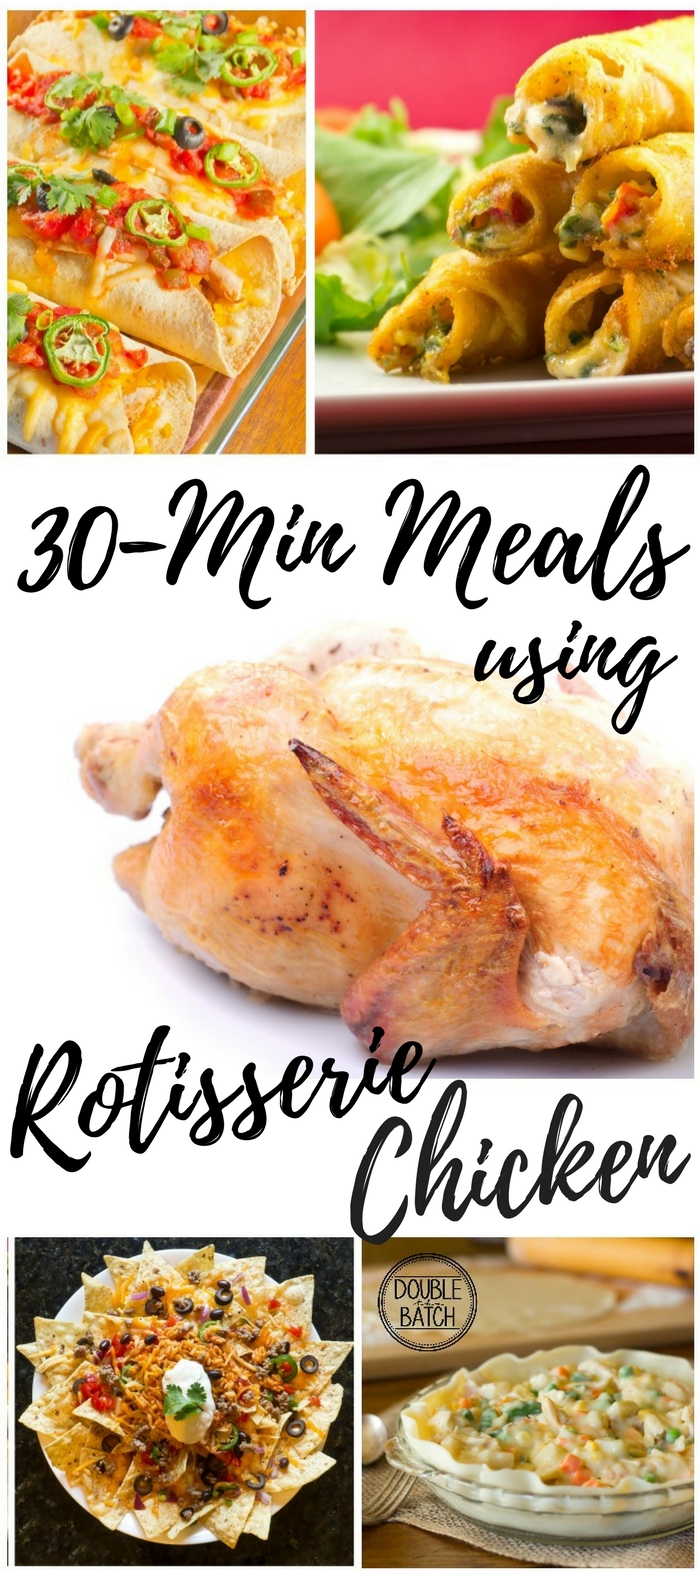 These chicken recipes save my life, and are so easy to use with a store-bought rotissoire chicken!